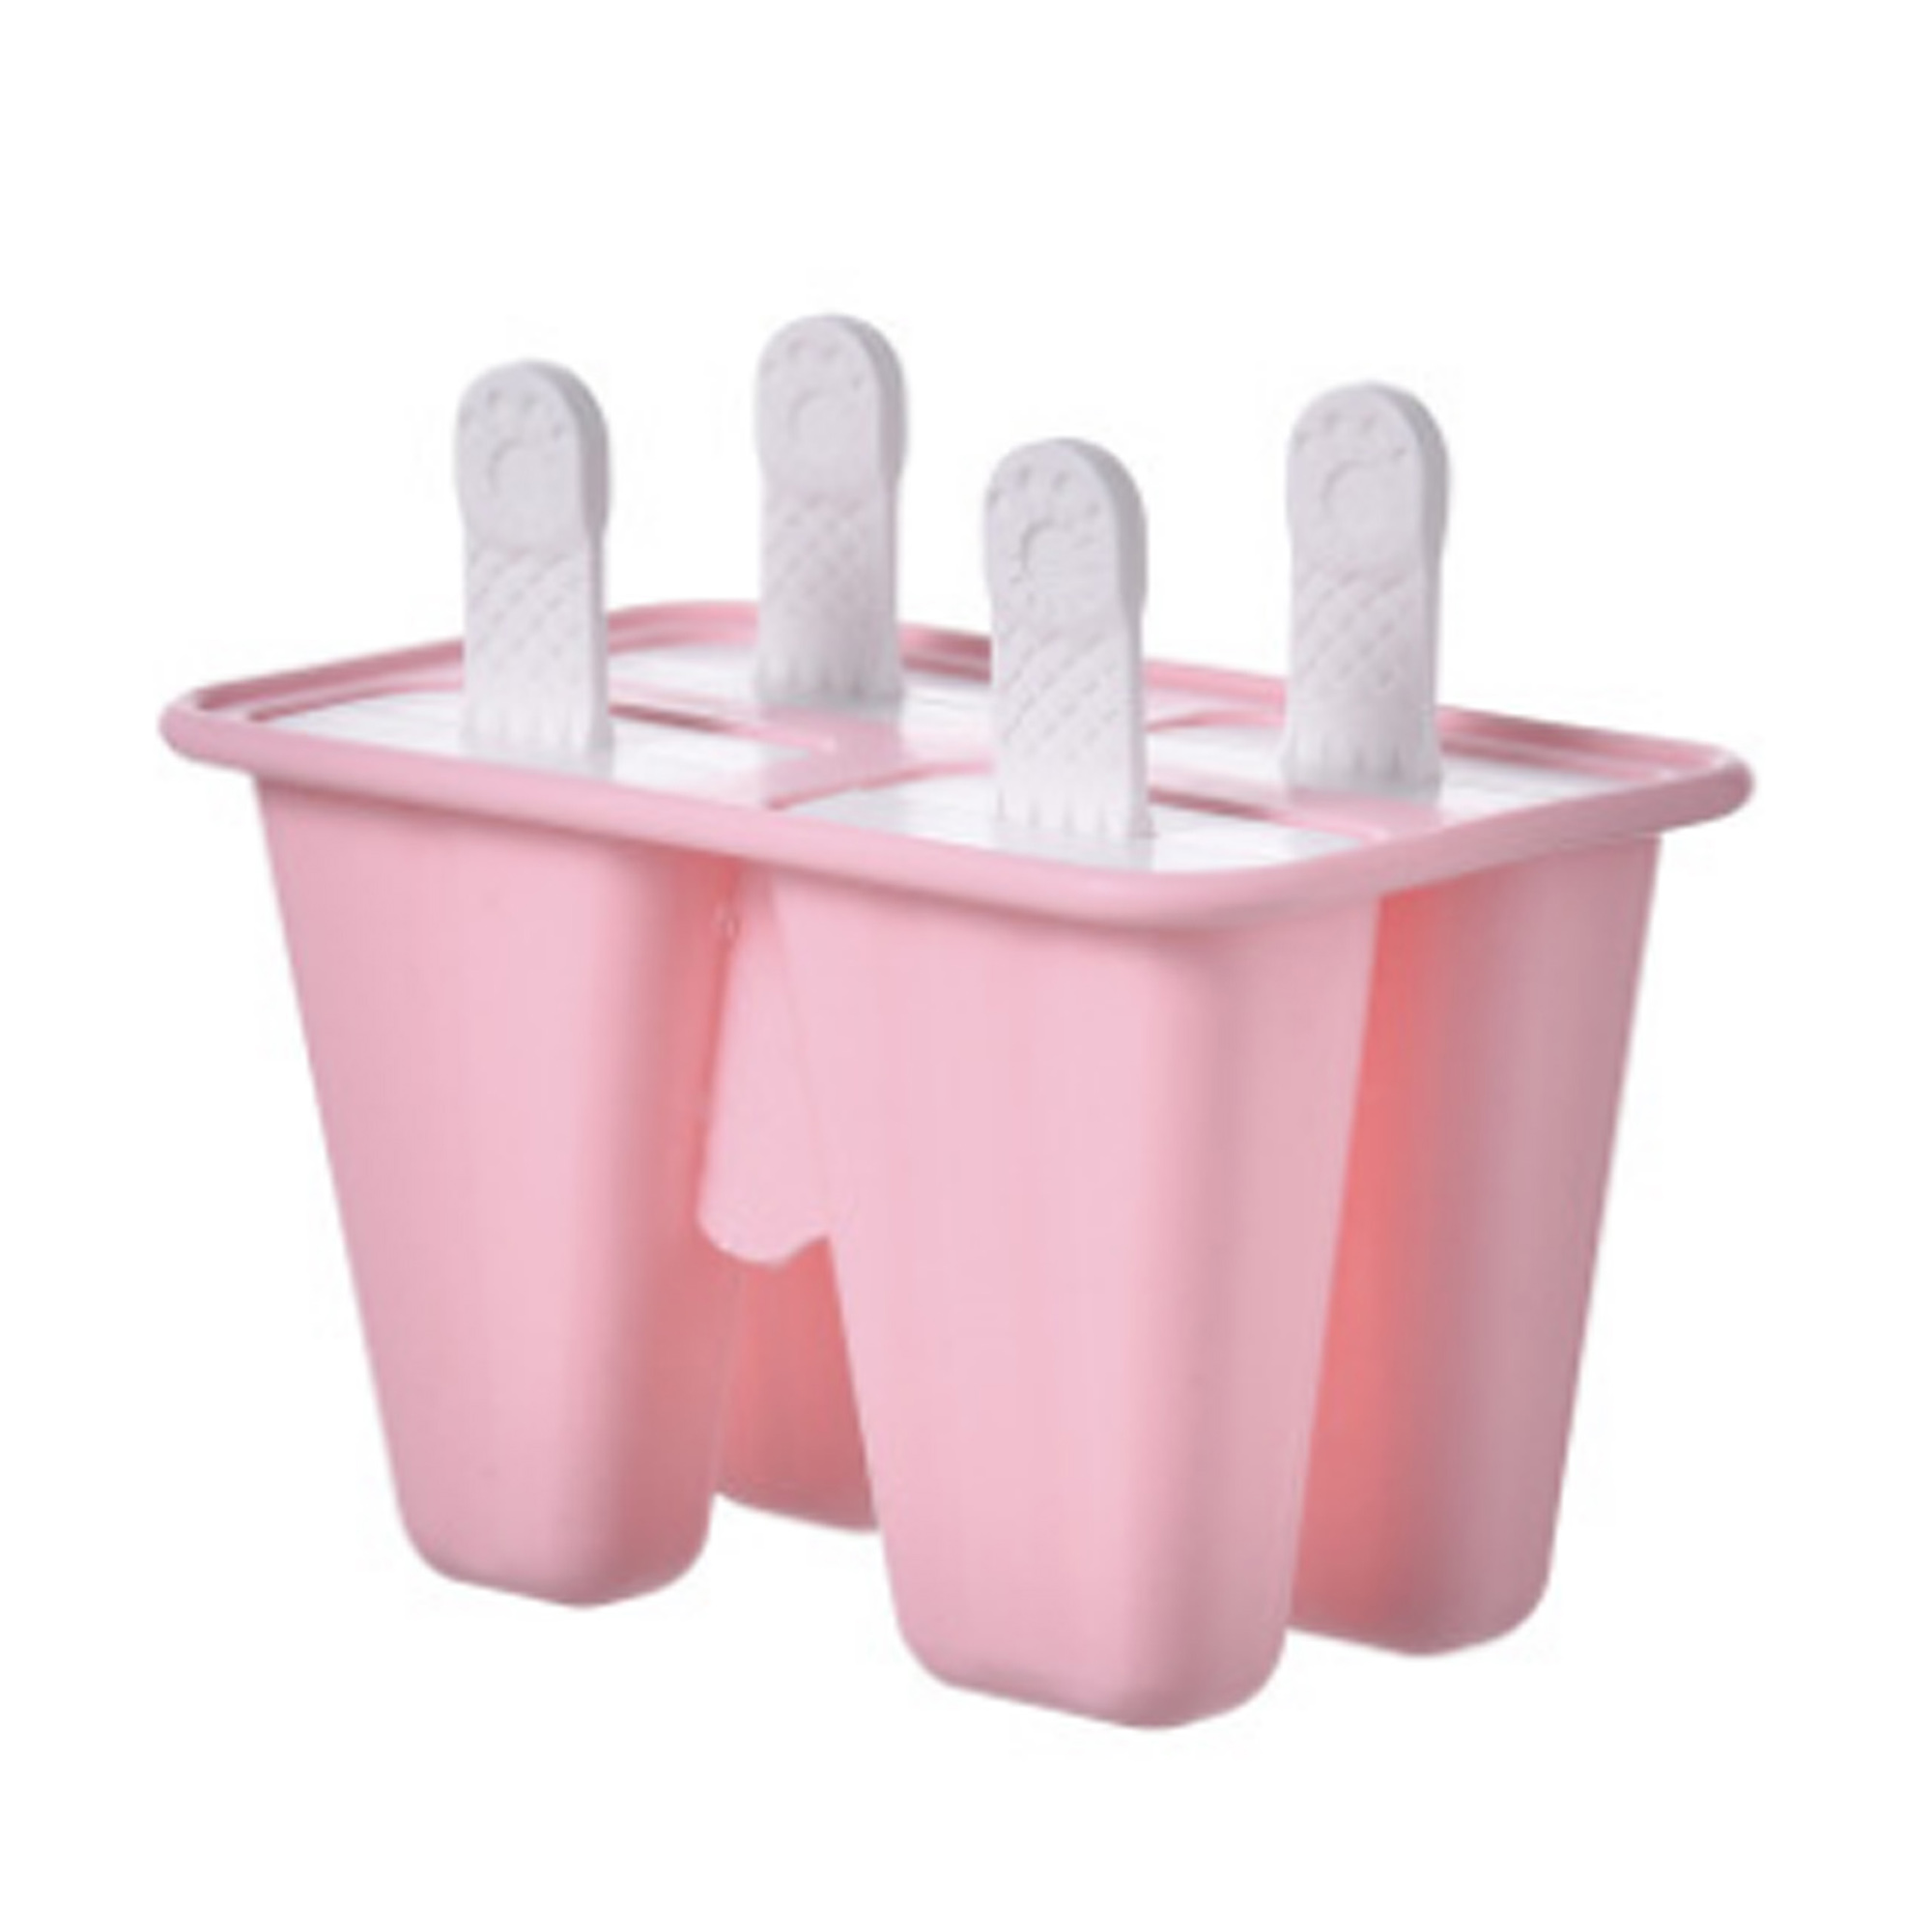 FOCUSNORM Popsicle Mold 4/6 Pieces Silicone Ice Pop Molds Reusable Ice ...